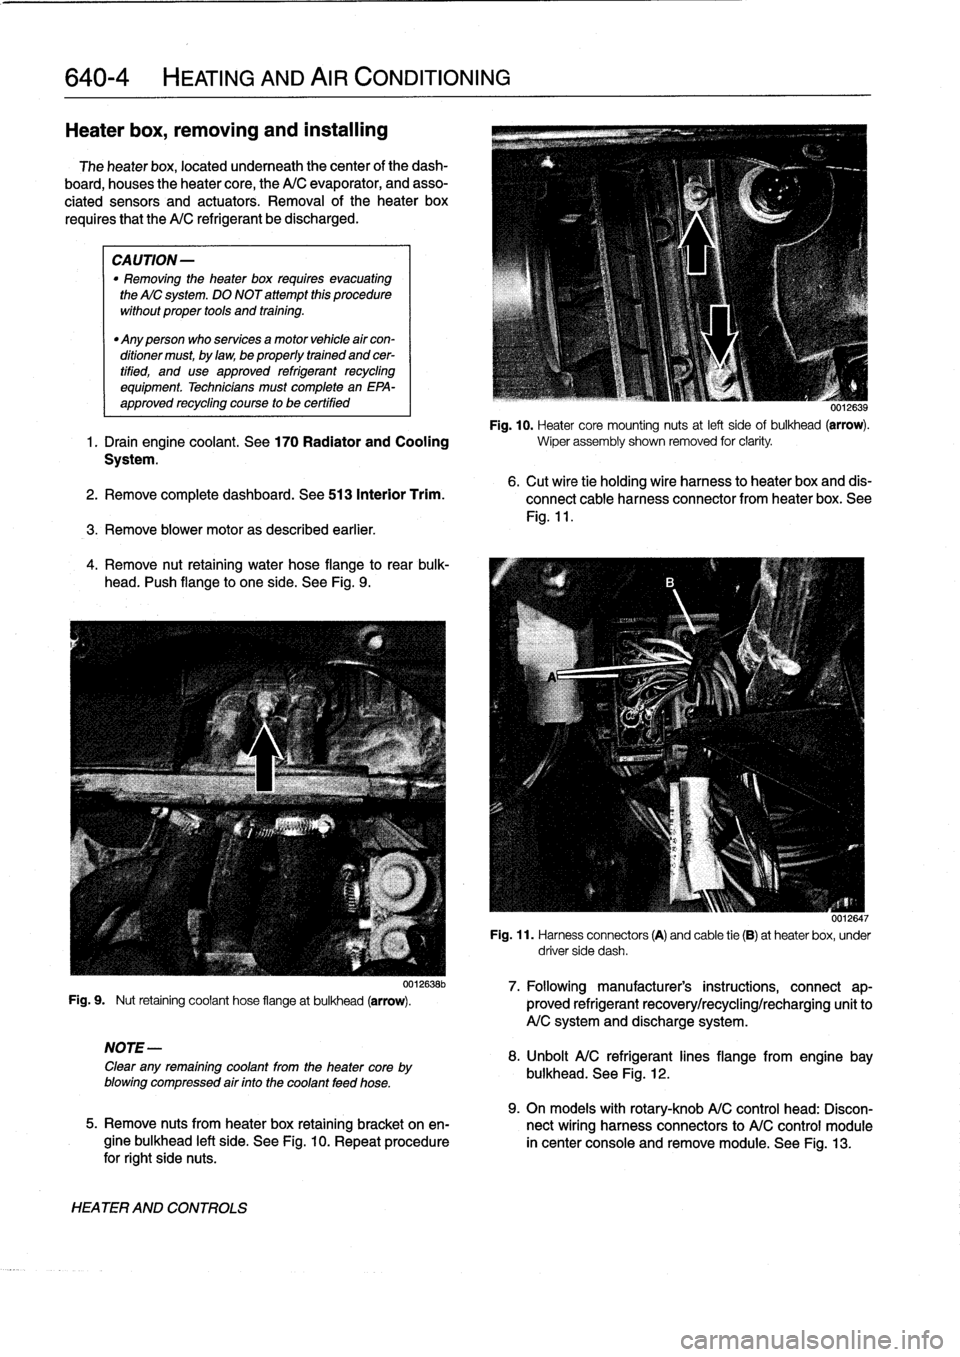 BMW M3 1994 E36 Owners Manual 
640-4

	

HEATING
AND
AIR
CONDITIONING

Heater
box,
removing
and
installing

The
heater
box,
located
underneath
thecenter
of
the
dash-

board,
houses
theheater
core,
the
A/C
evaporator,
and
asso-

ci